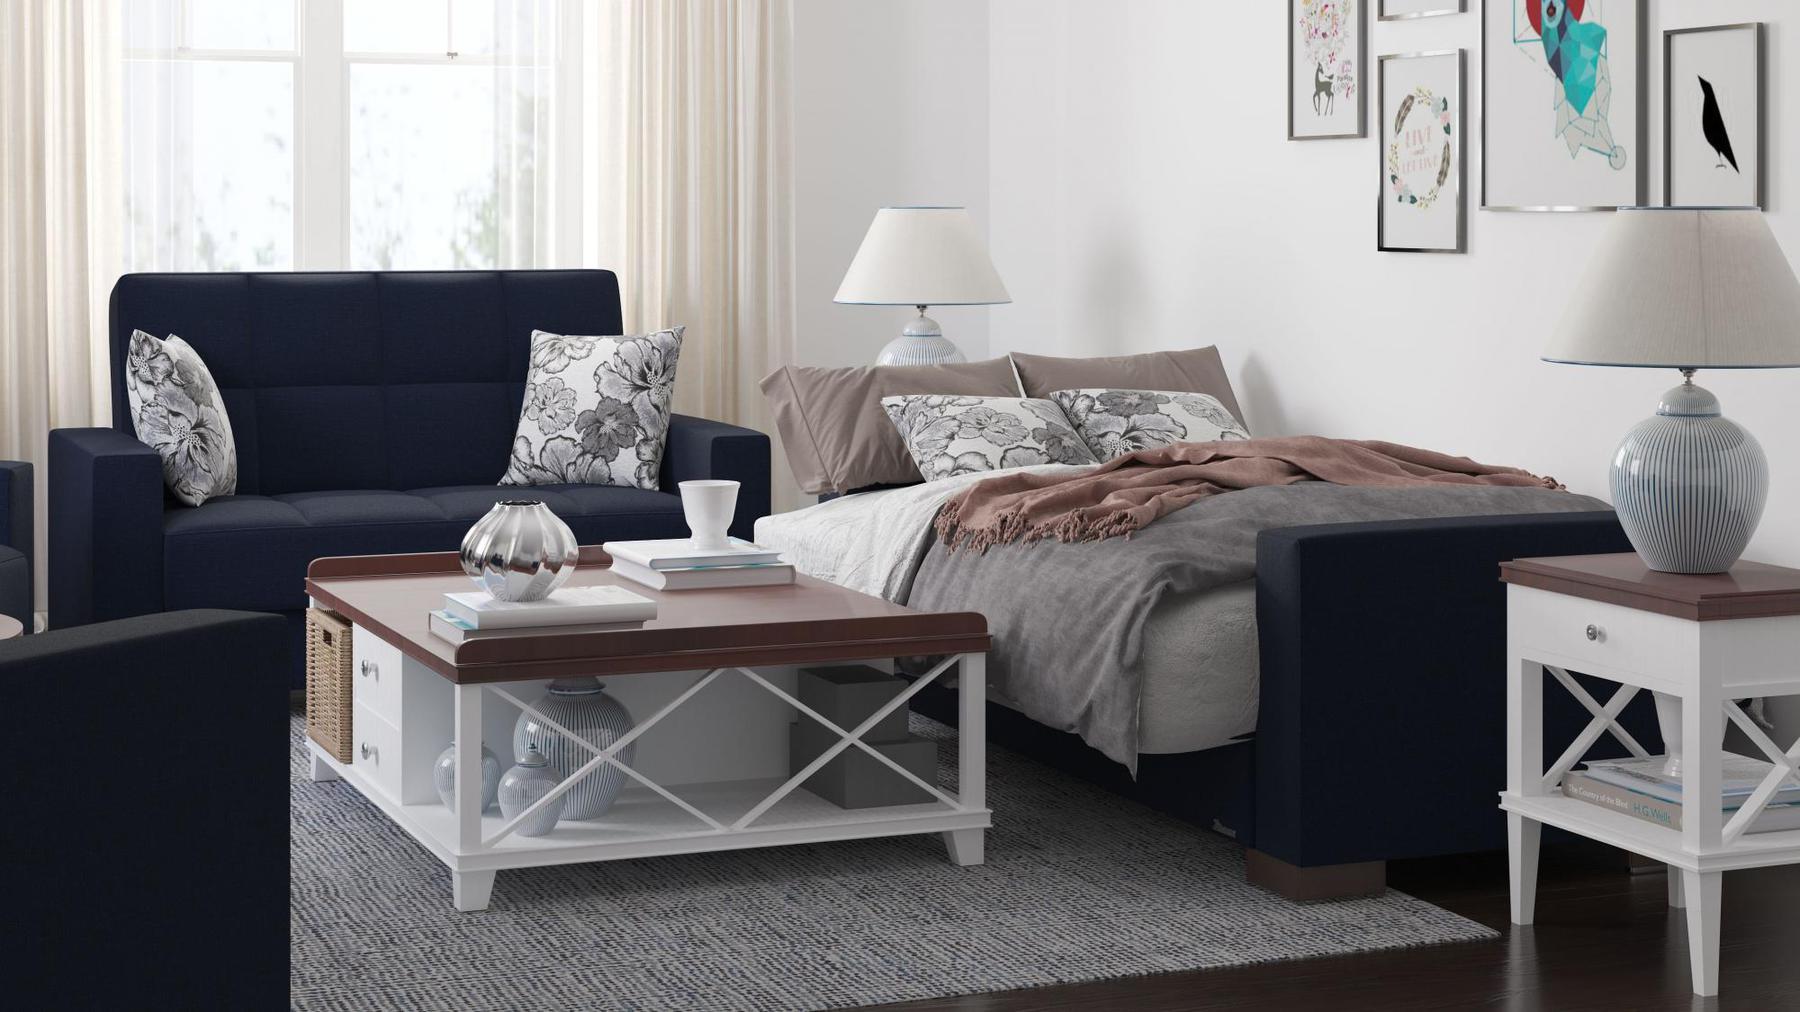 Modern design, Black Blue Denim , Chenille  upholstered convertible sleeper Loveseat with underseat storage from Voyage Track by Ottomanson in living room lifestyle setting converted to sleeper. This Loveseat measures 67 inches width by 36 inches depth by 41 inches height.